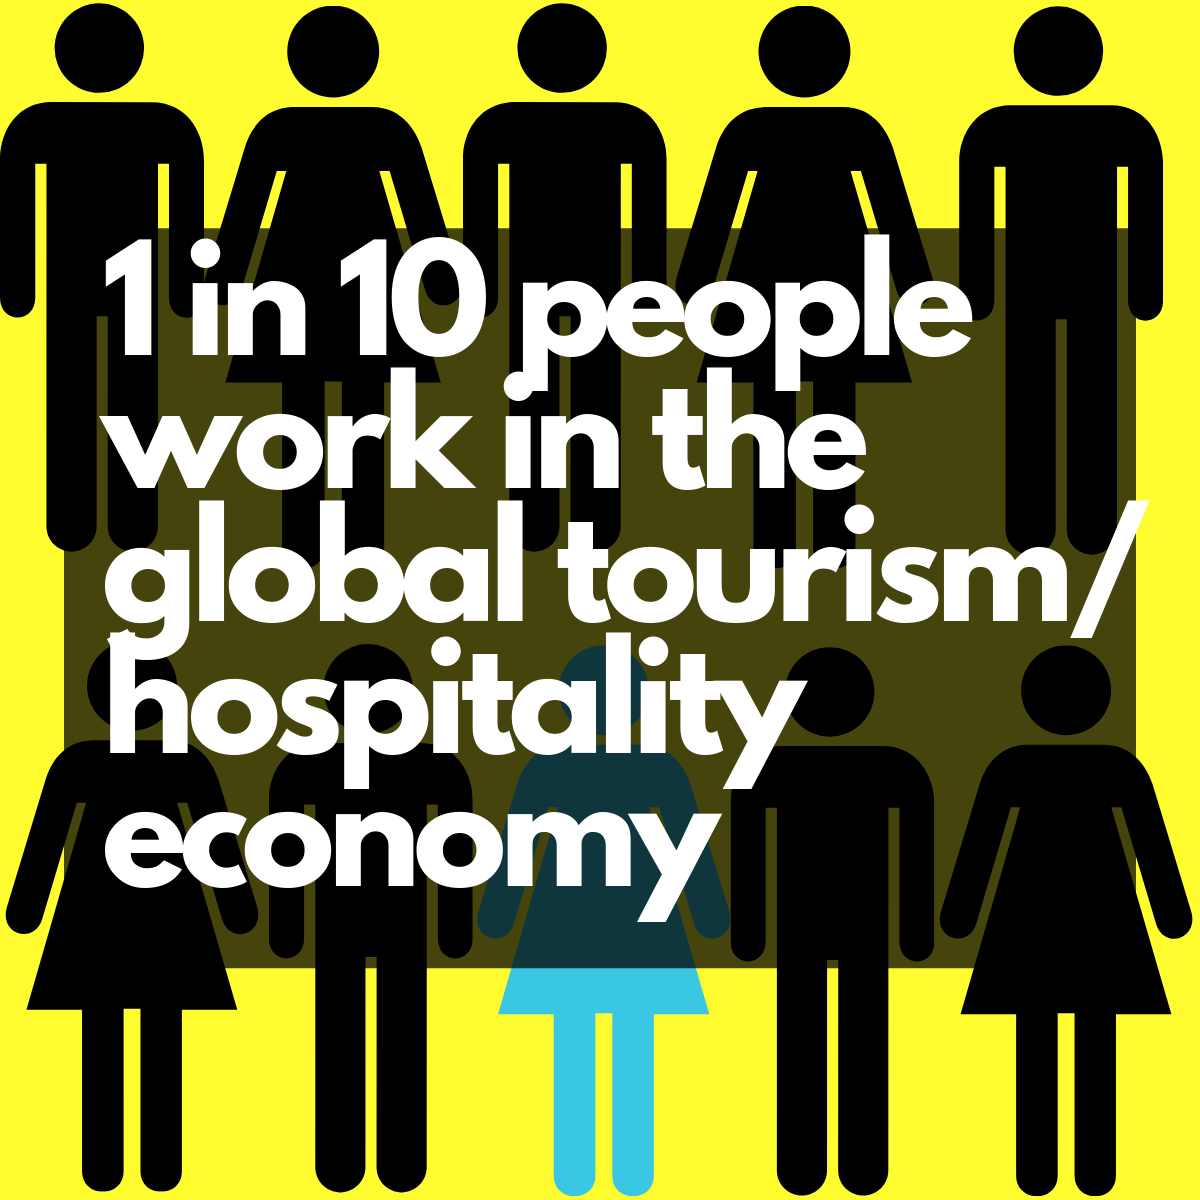 1 in 10 people work in the global tourism/hospitality economy